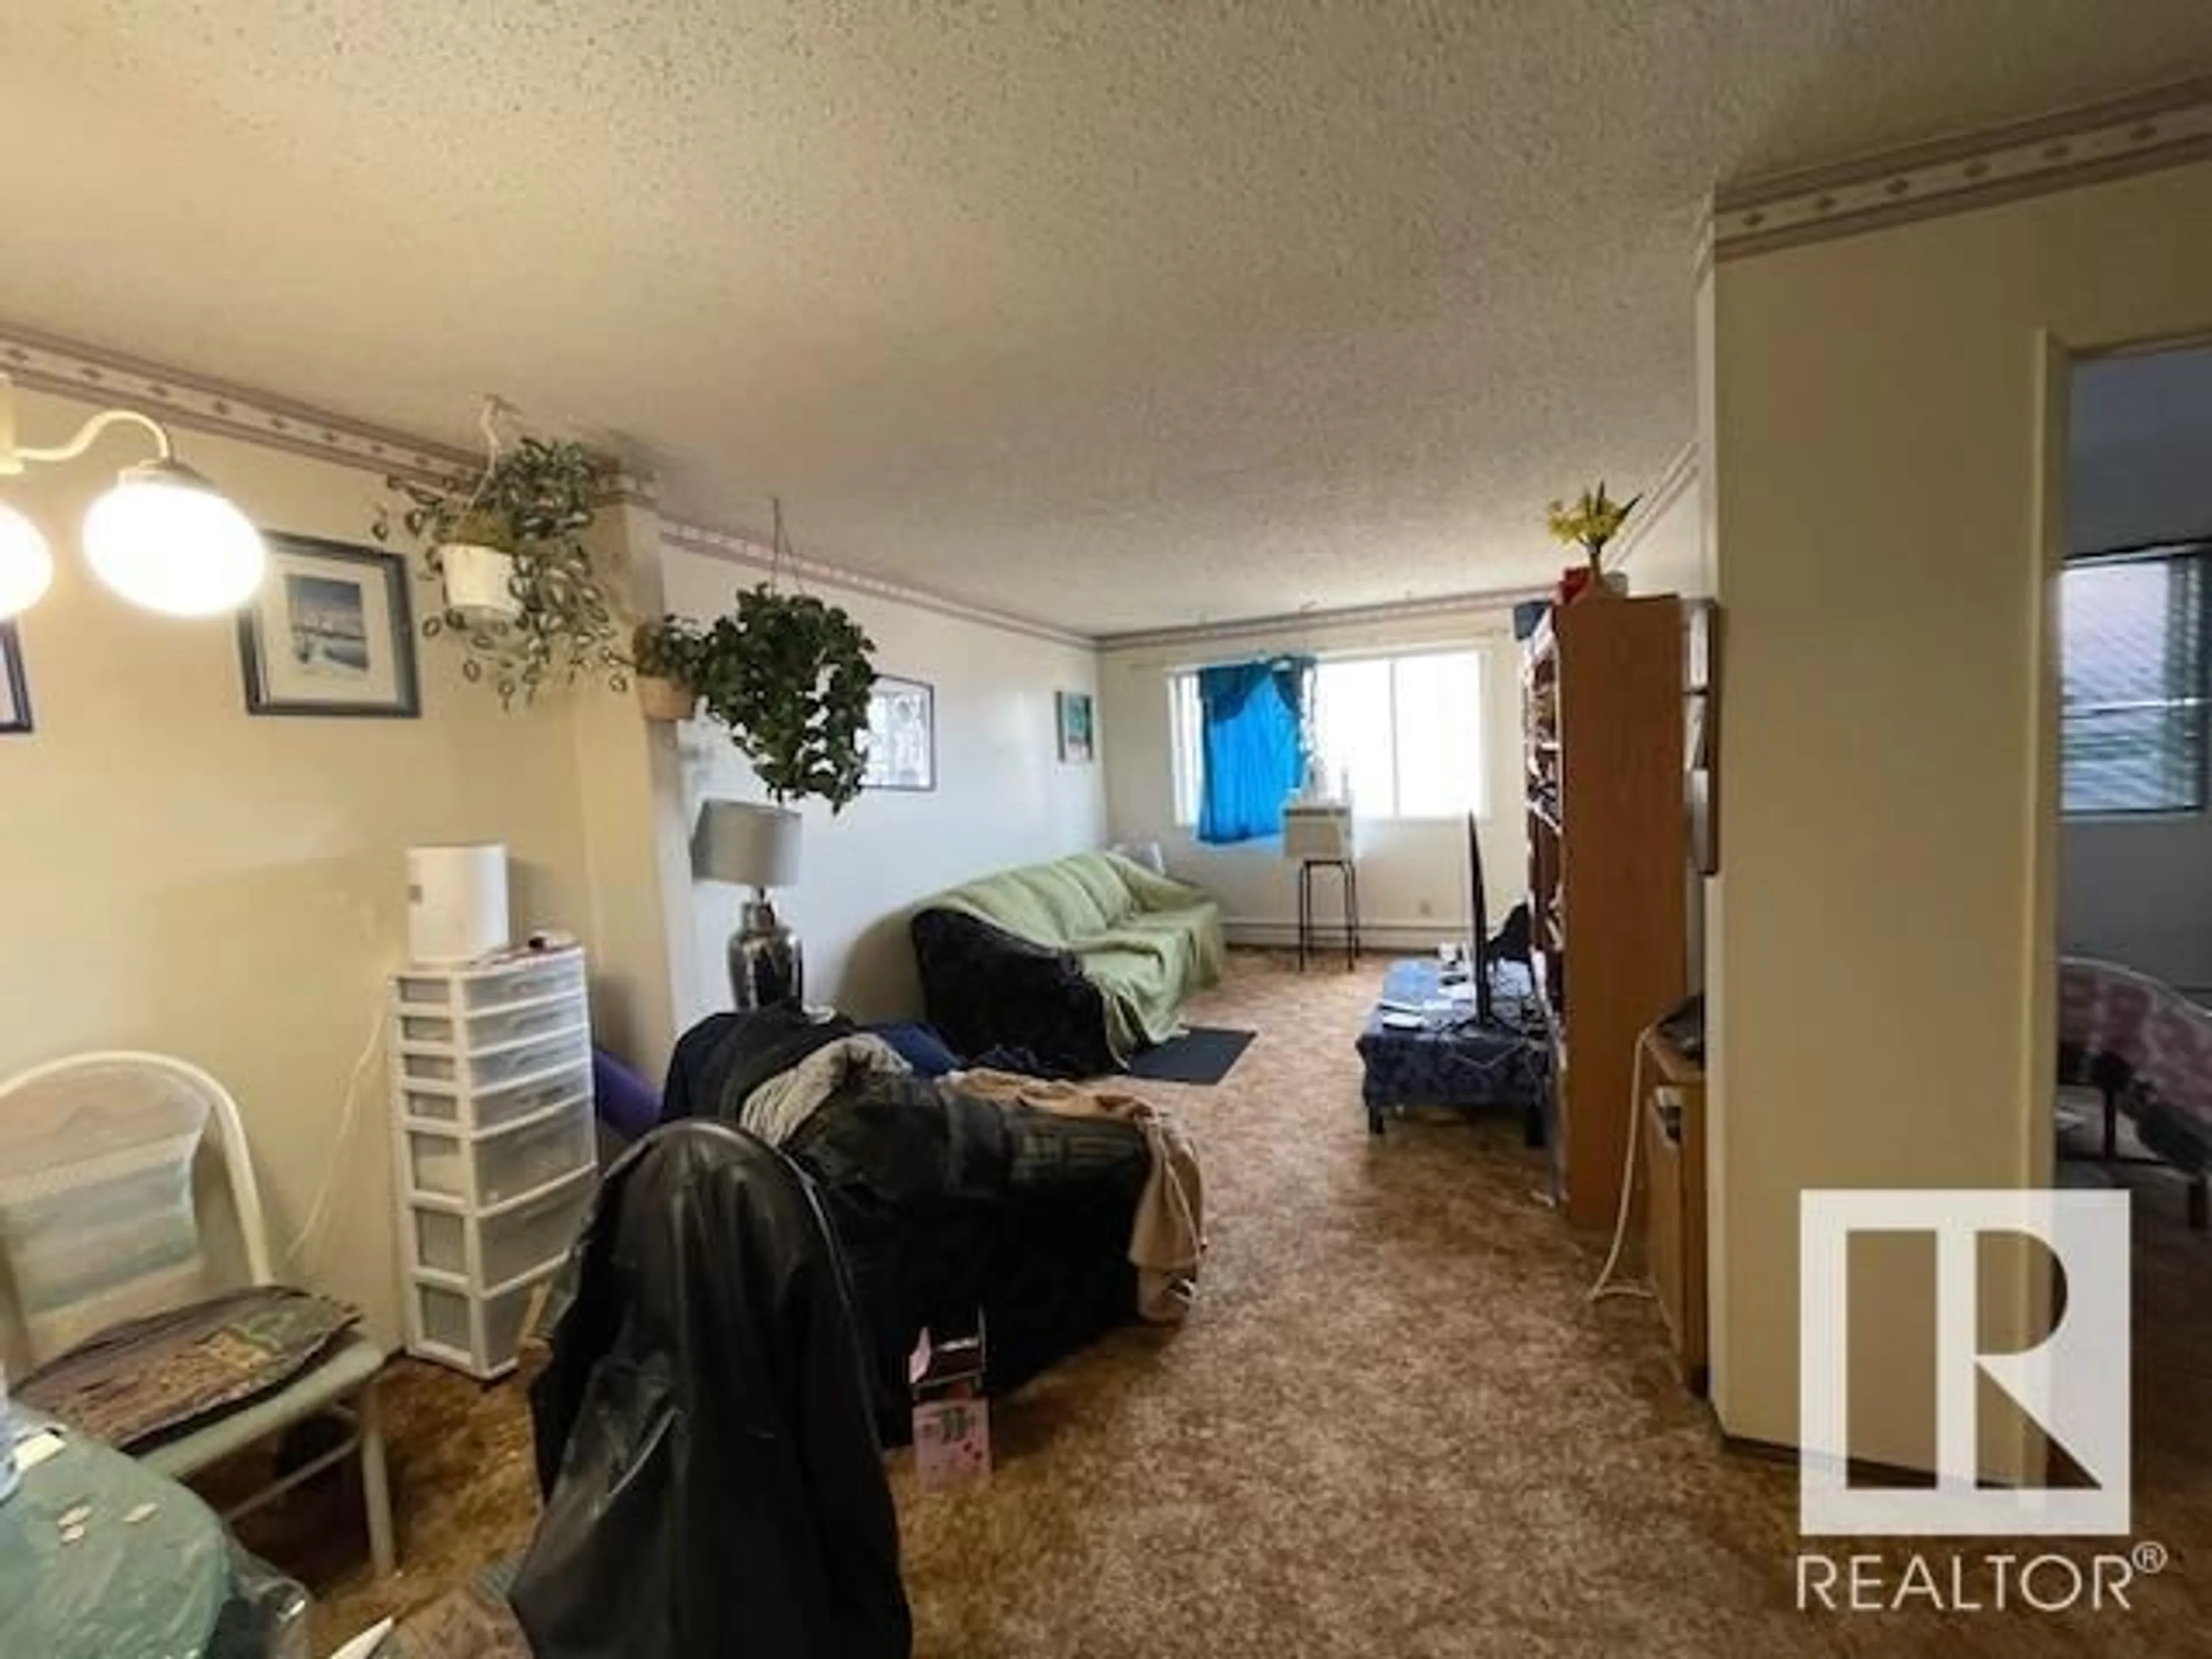 A pic of a room for #308 14908 26 ST NW, Edmonton Alberta T5Y2G4